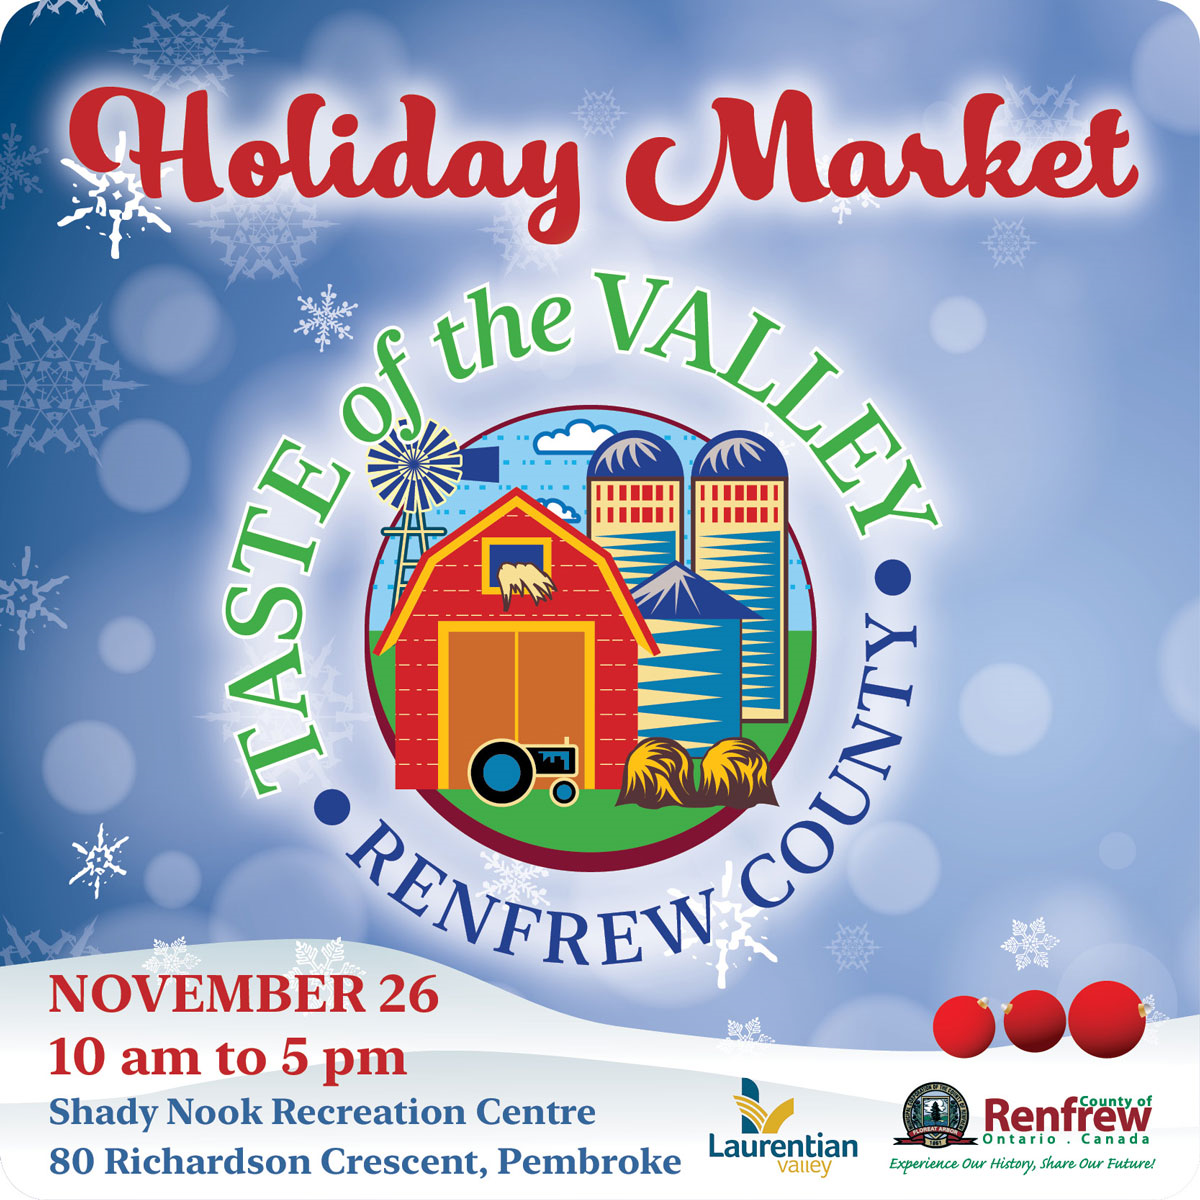 Poster with event details for Taste of the Valley Holiday Market.